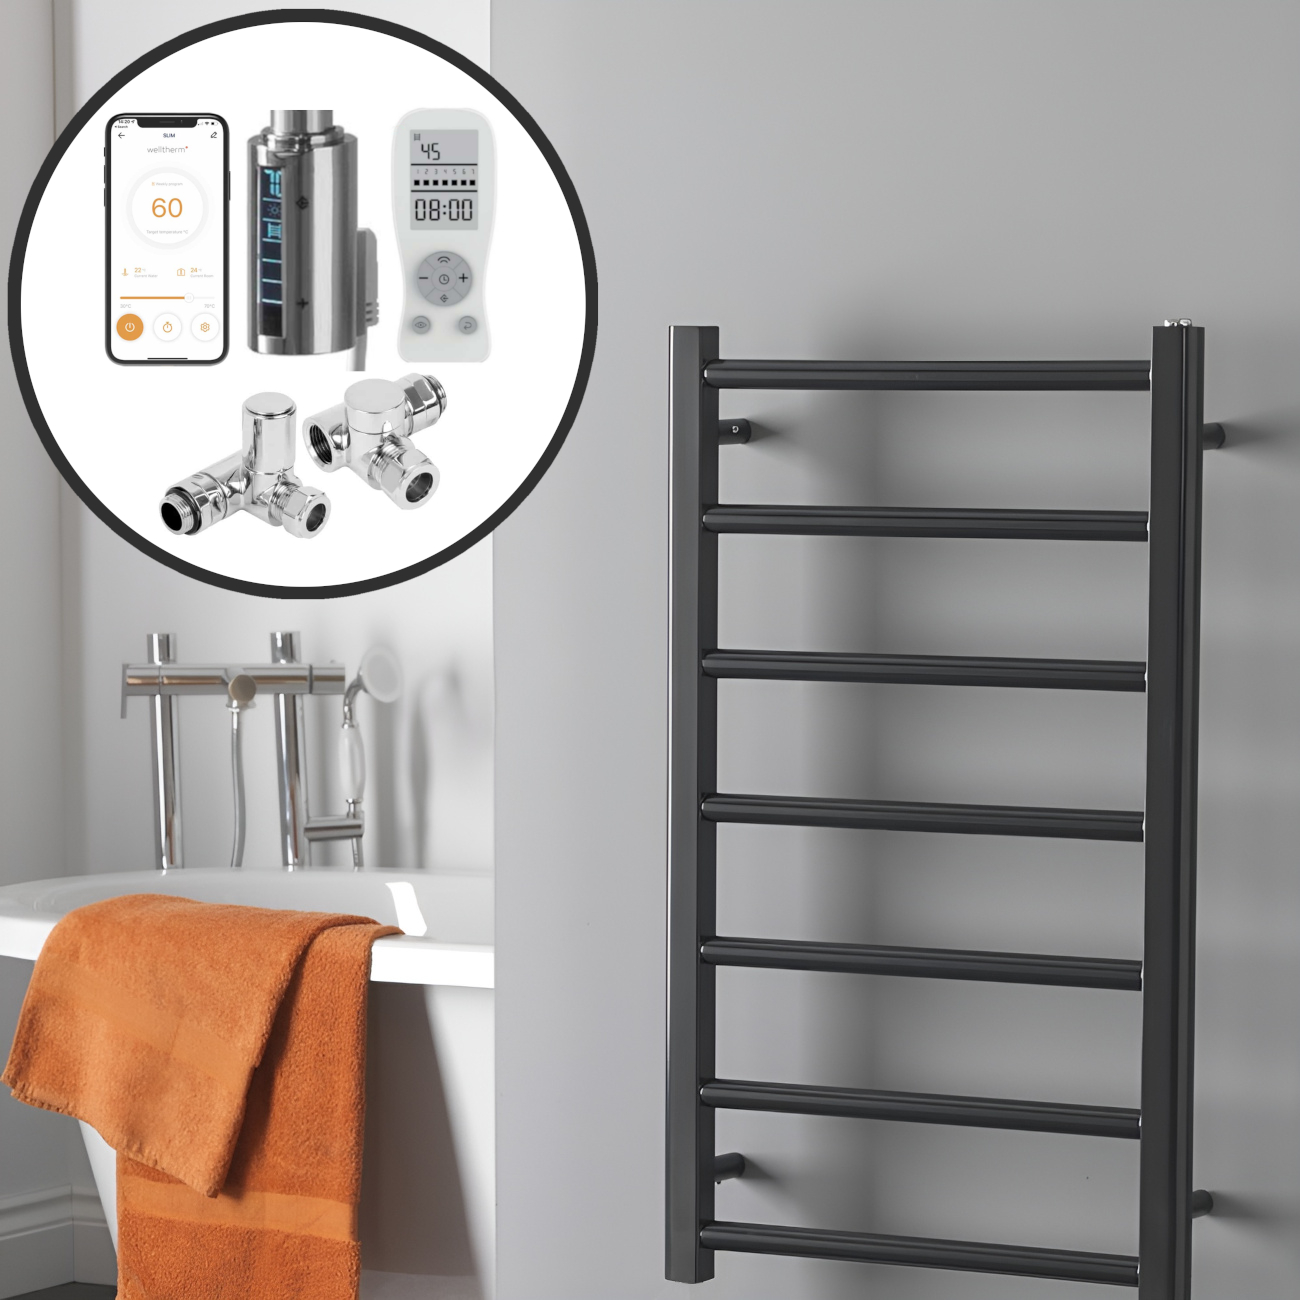 Alpine Anthracite | Dual Fuel Towel Rail with Thermostat, Timer + WiFi Control Best Quality & Price, Energy Saving / Economic To Run Buy Online From Adax SolAire UK Shop 2